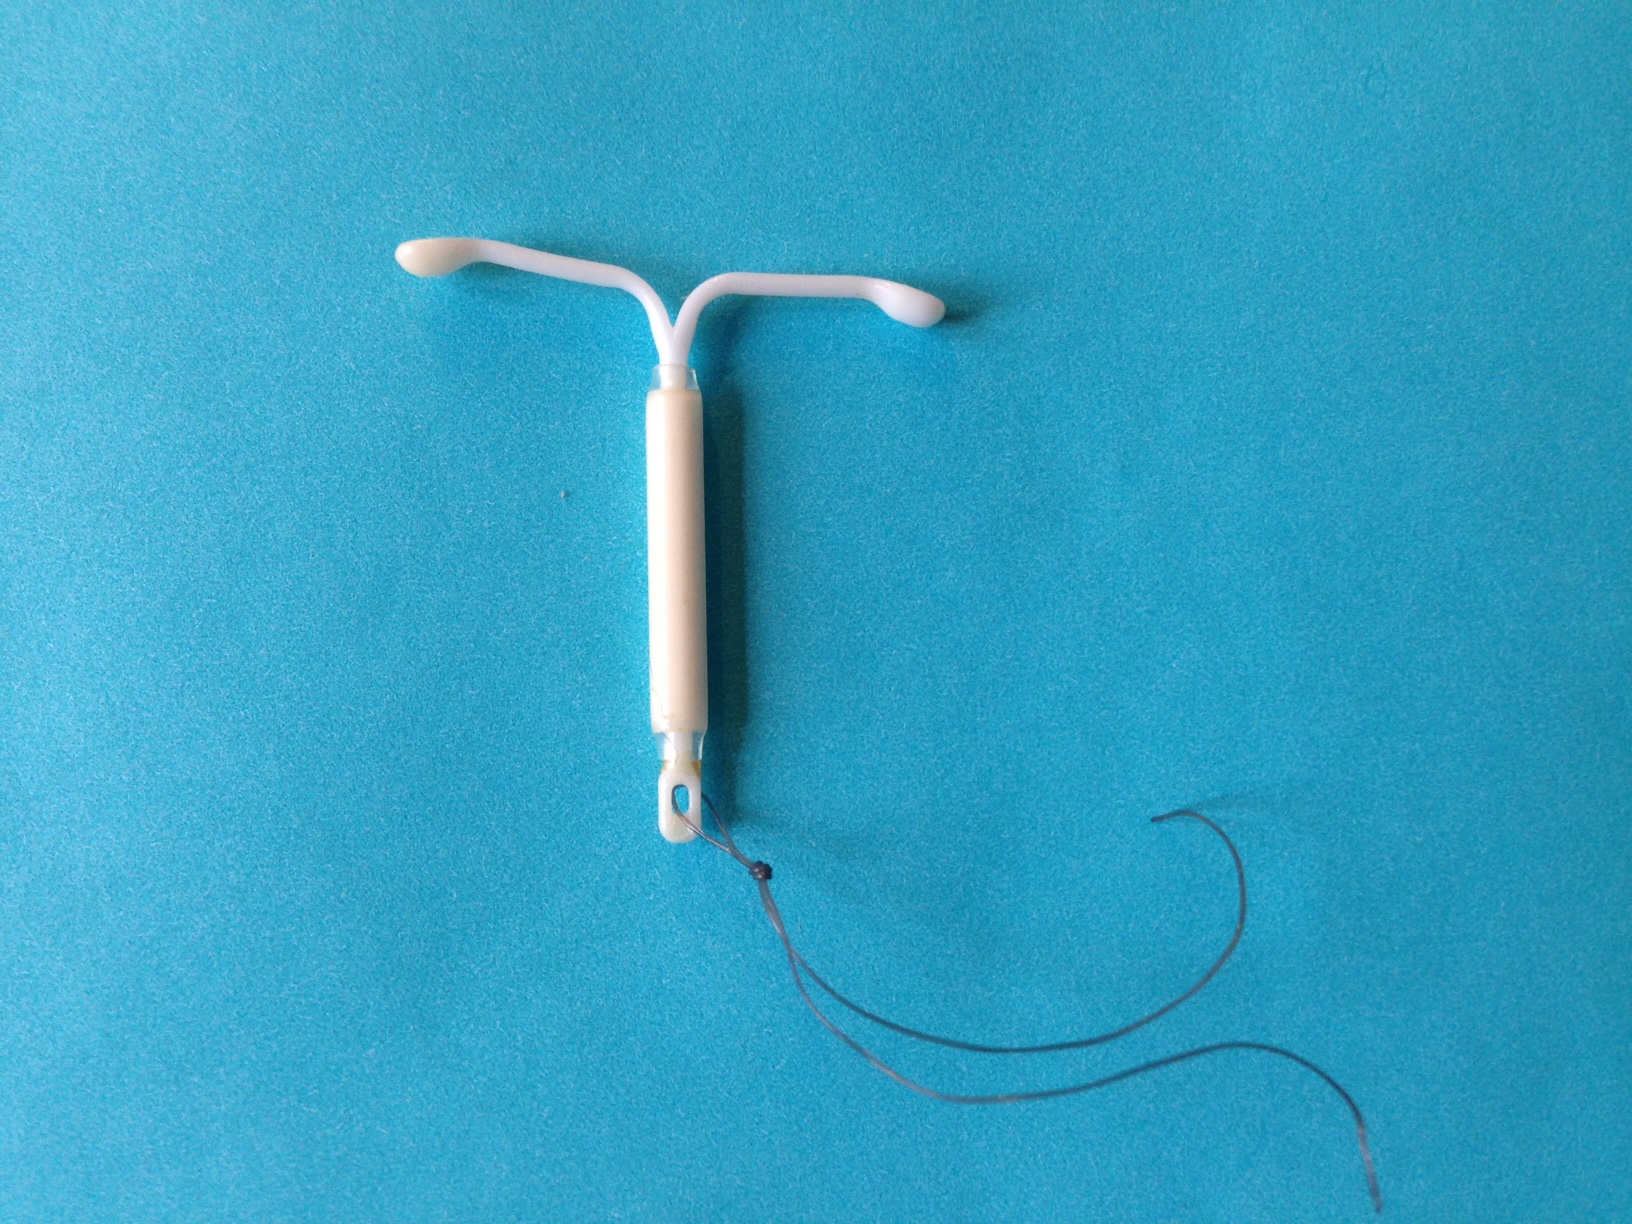 Major side effects of IUD removal